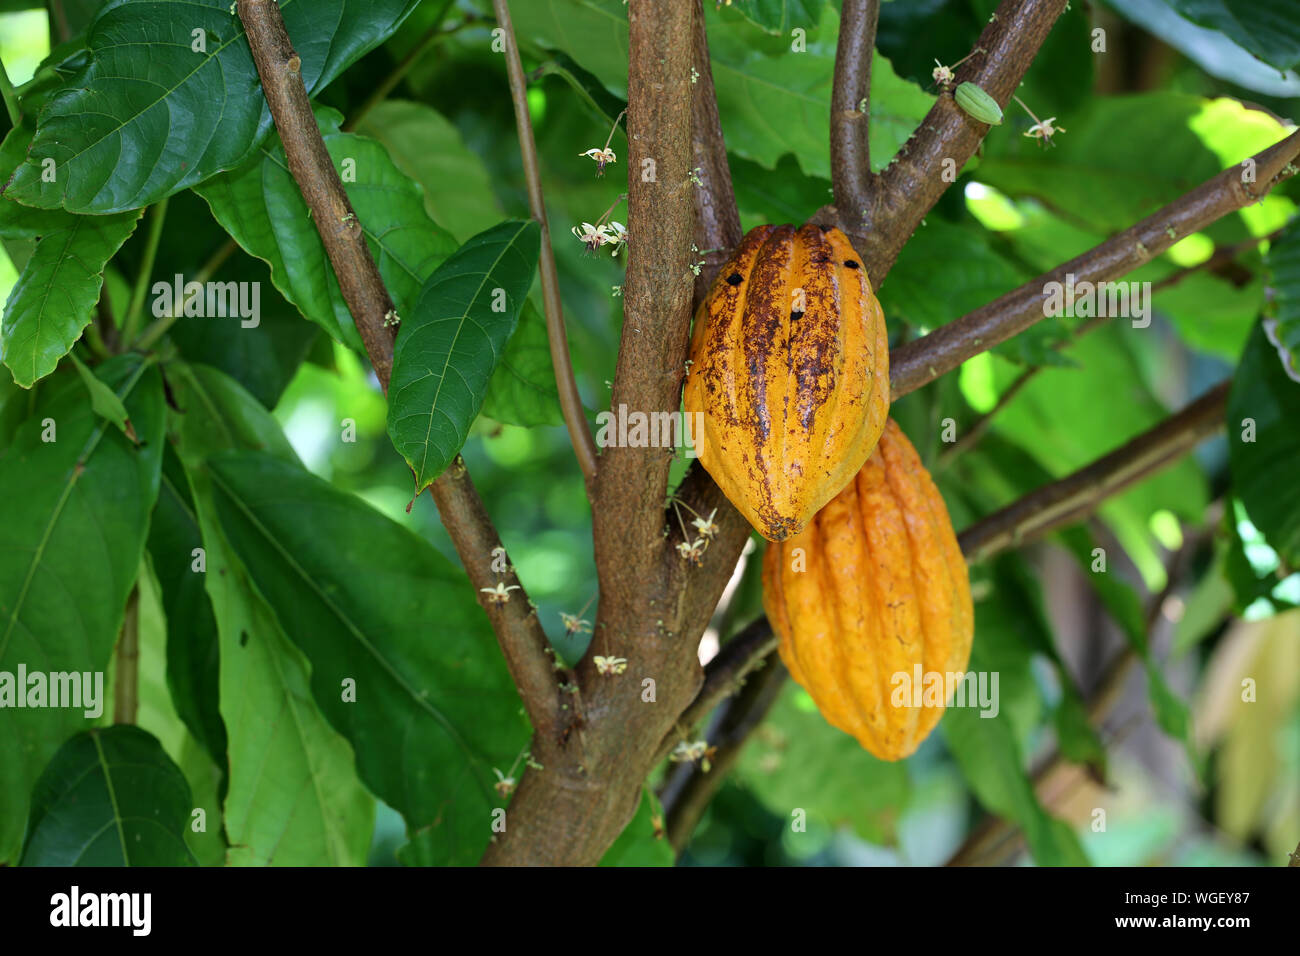 Cocoa tree with pods and flowers Stock Photo